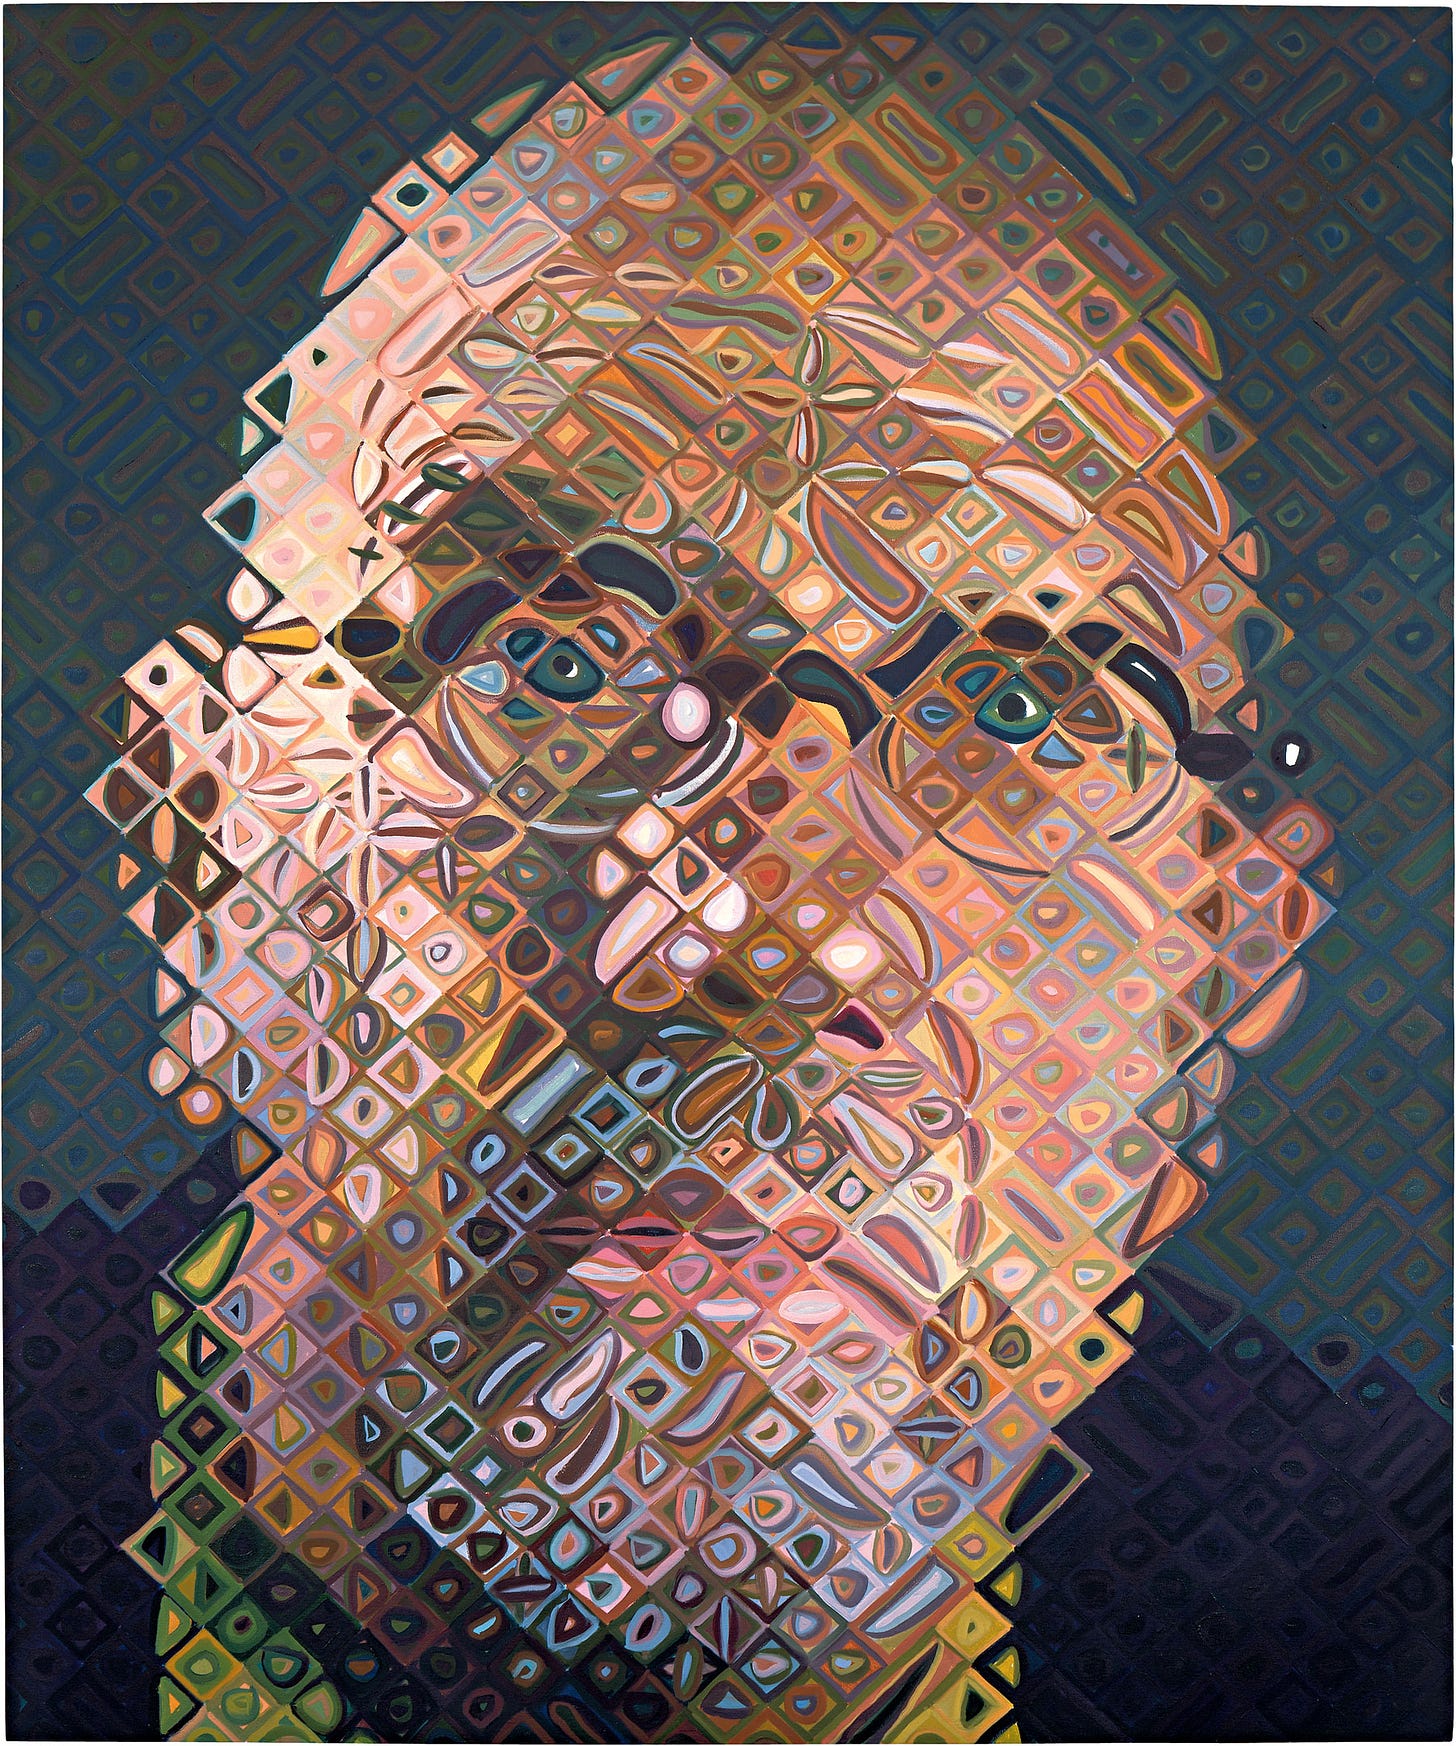 A painting of a bald man with a goatee beard, wearing glasses.